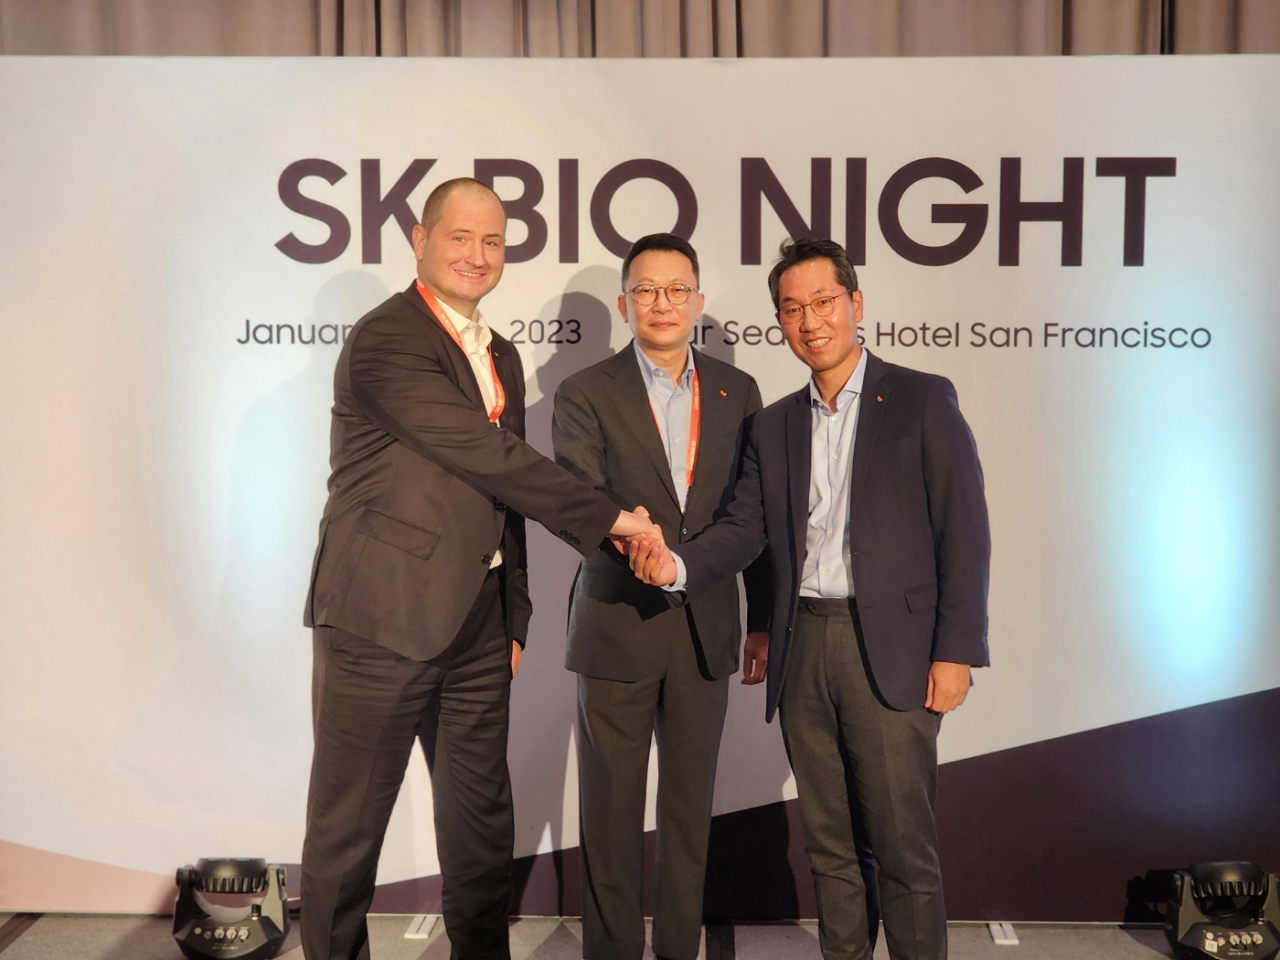 From left, SK pharmteco CEO Joerg Ahlgrimm, SK Bio Investment Center Head Kim Yeon-tae and SK biopharmaceuticals CEO Lee Dong-hoon shake hands at SK Bio Night at the Four Seasons Hotel in San Francisco on Wednesday. (SK Inc)